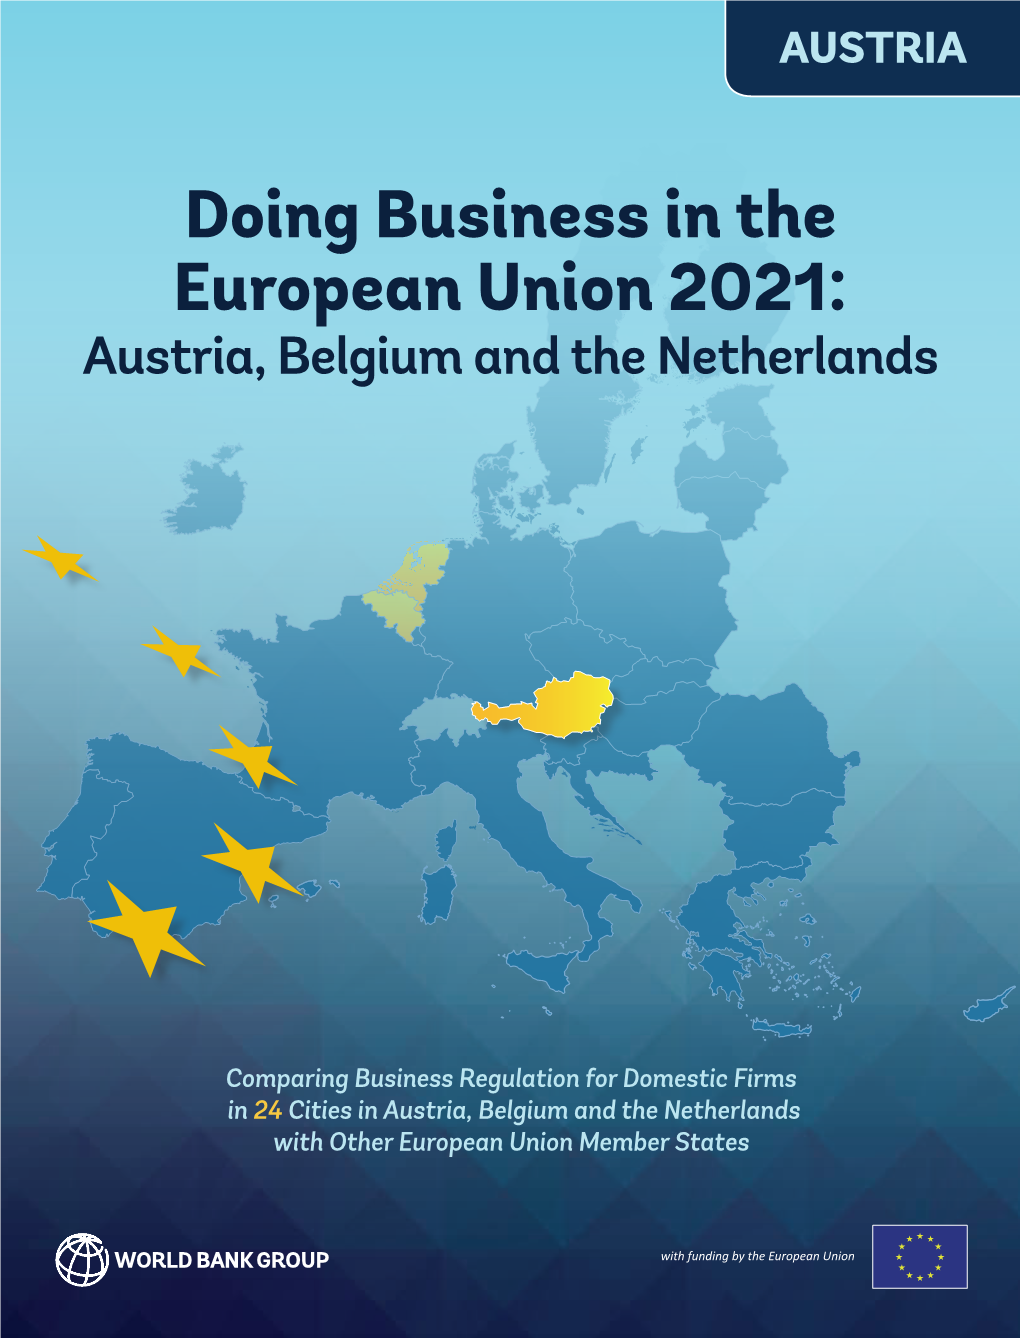 Doing Business in the European Union 2021: Austria, Belgium and the Netherlands